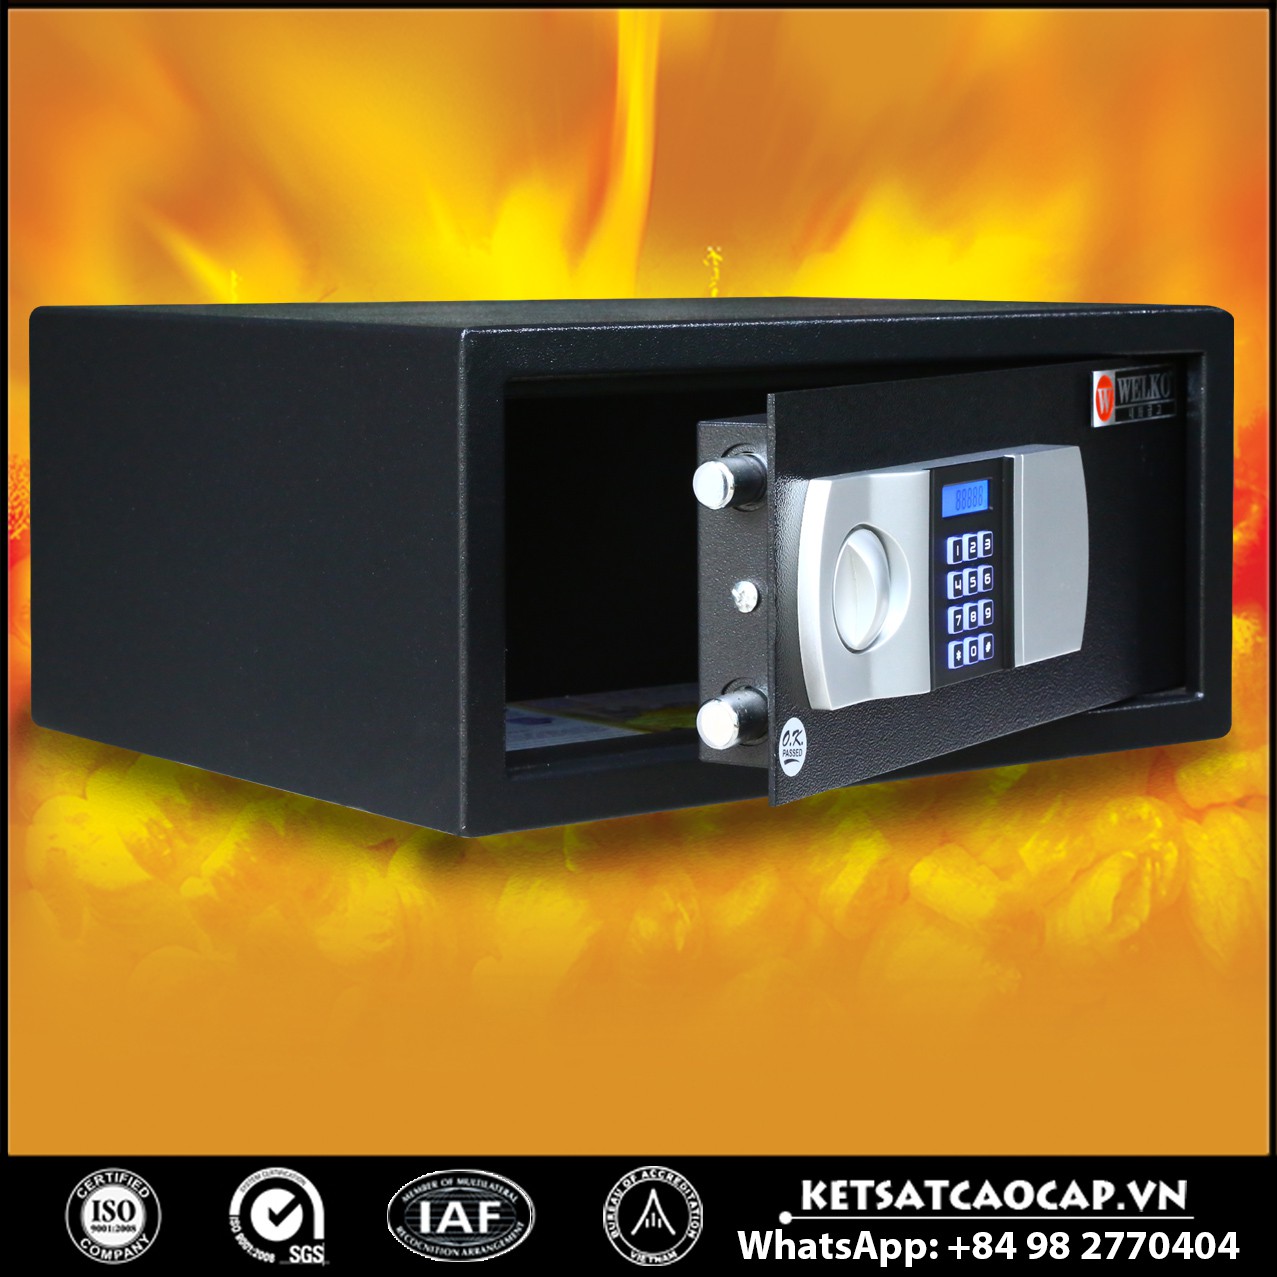 Hotel Safe Dimensions Suppliers and Exporters‎